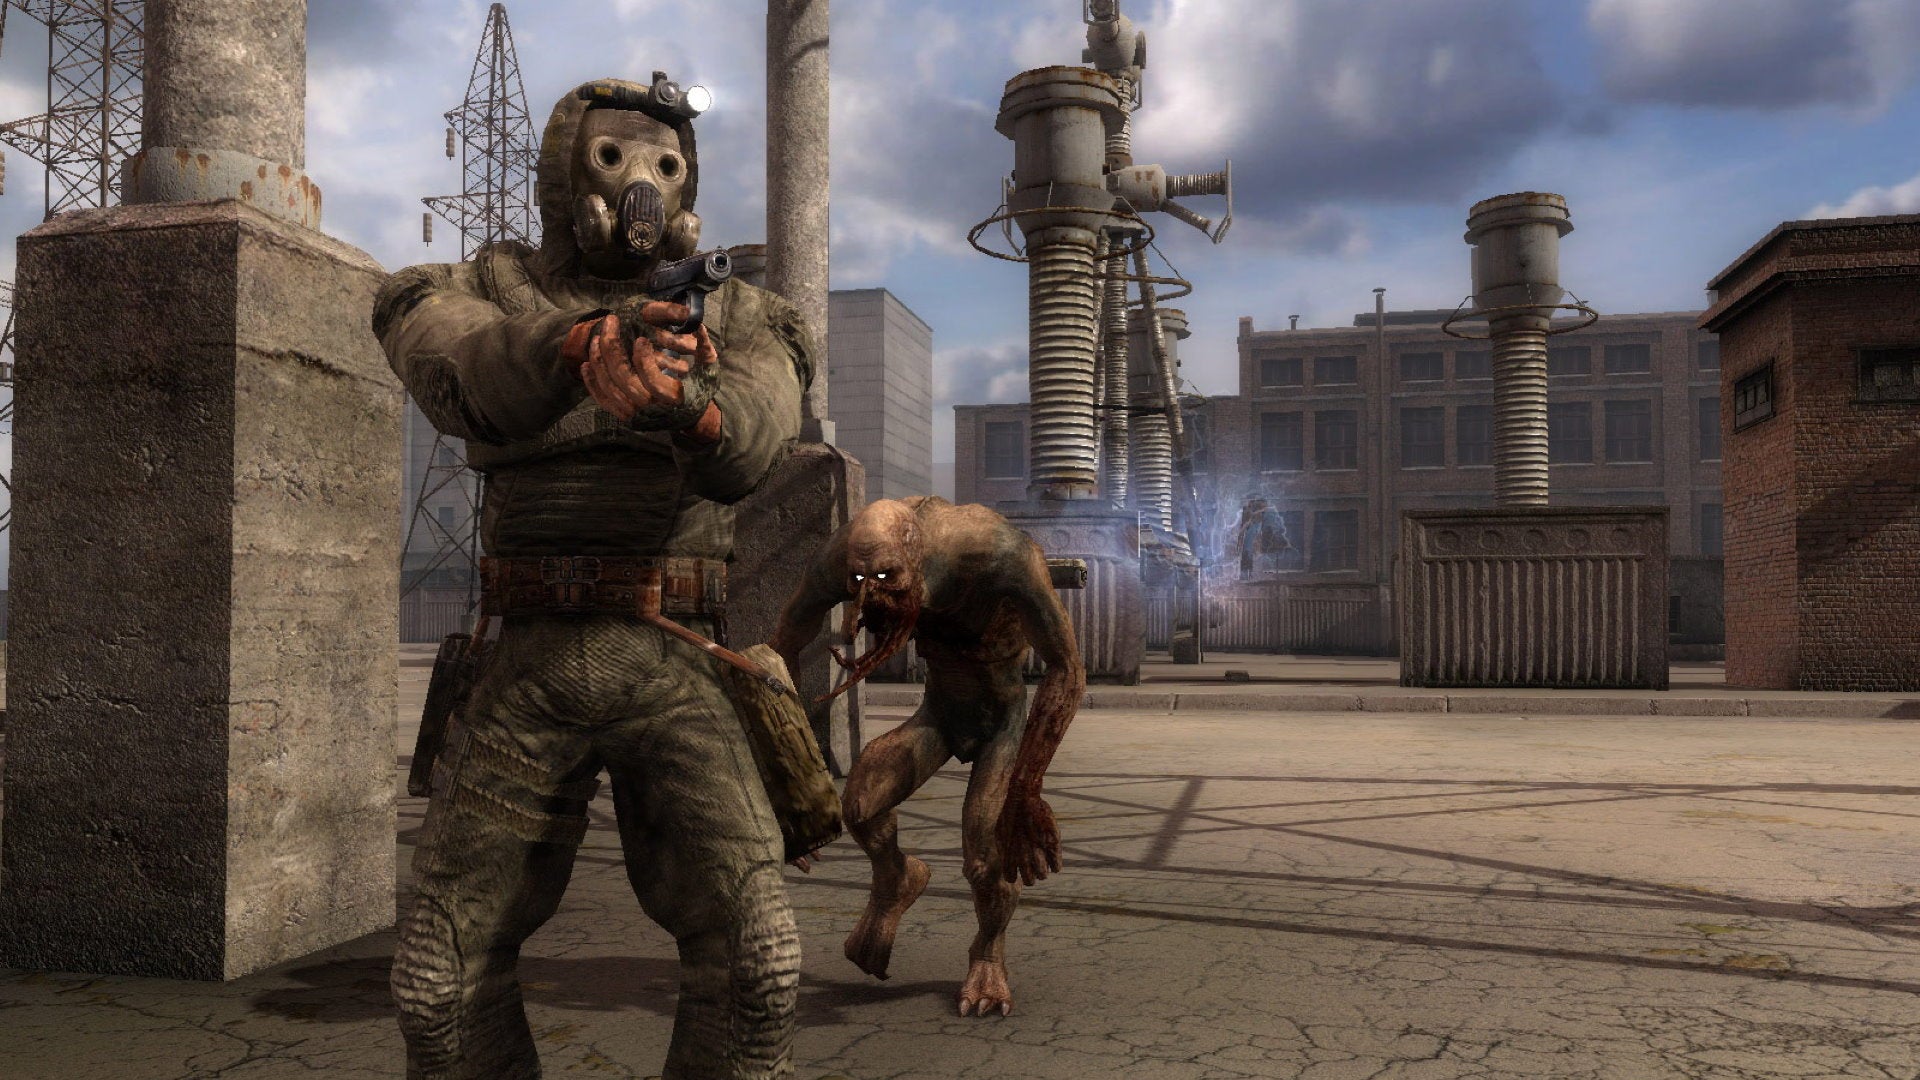 A monster creeps up behind a masked soldier in STALKER: Call of Pripyat